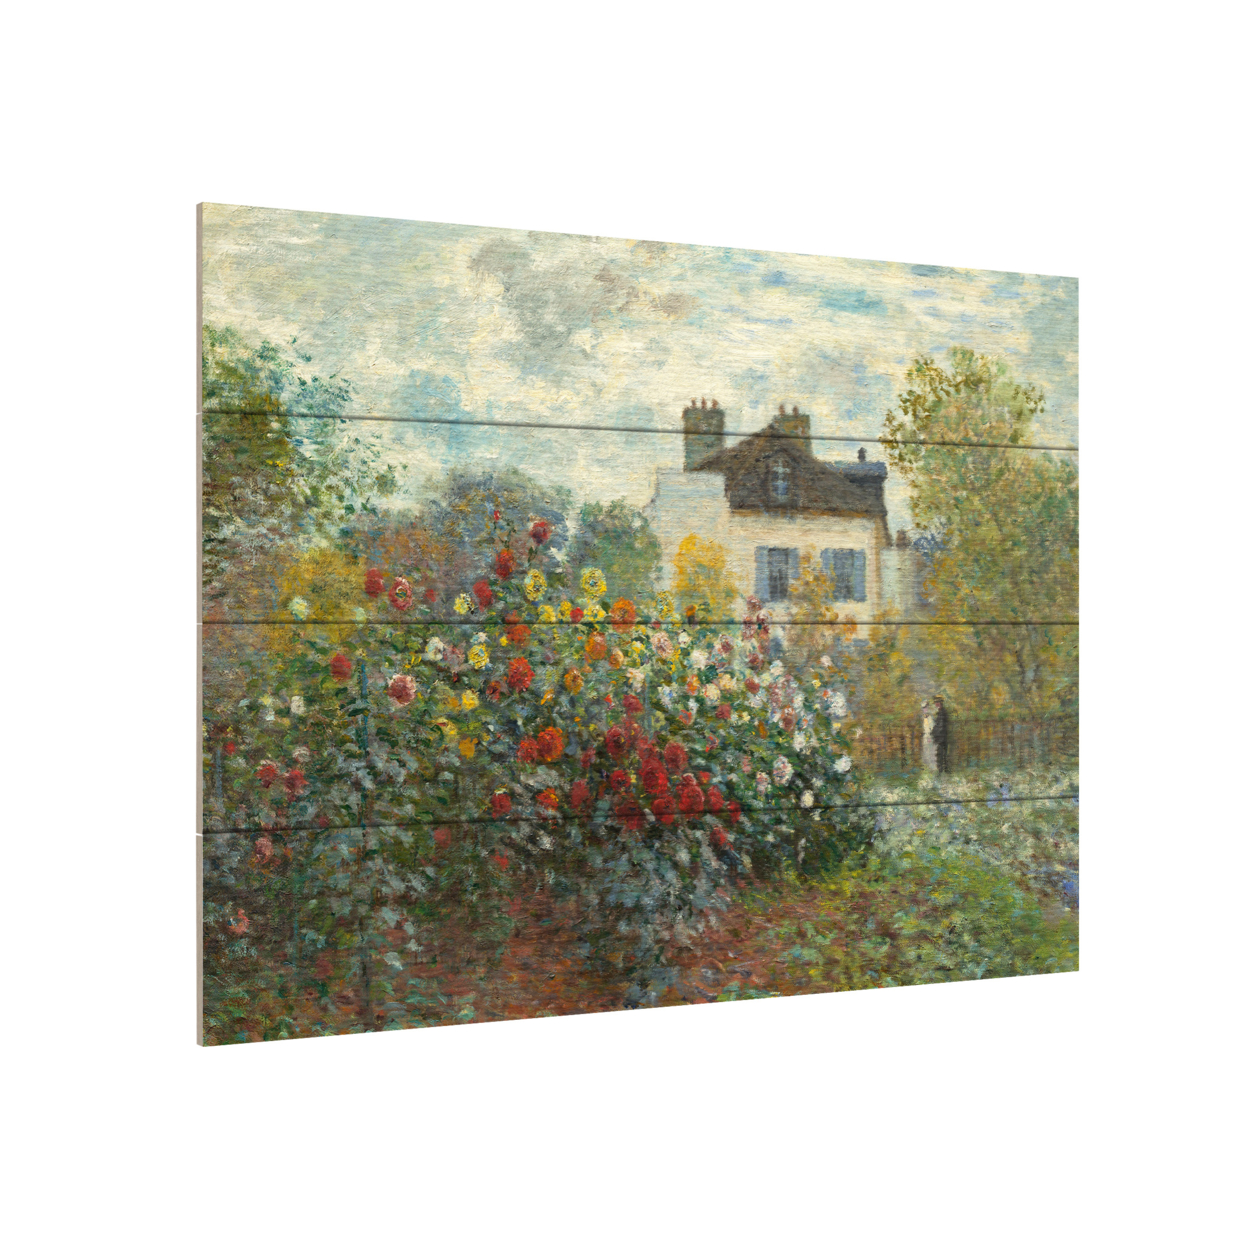 Wall Art 12 X 16 Inches Titled The Artists Garden In Argenteuil Ready To Hang Printed On Wooden Planks